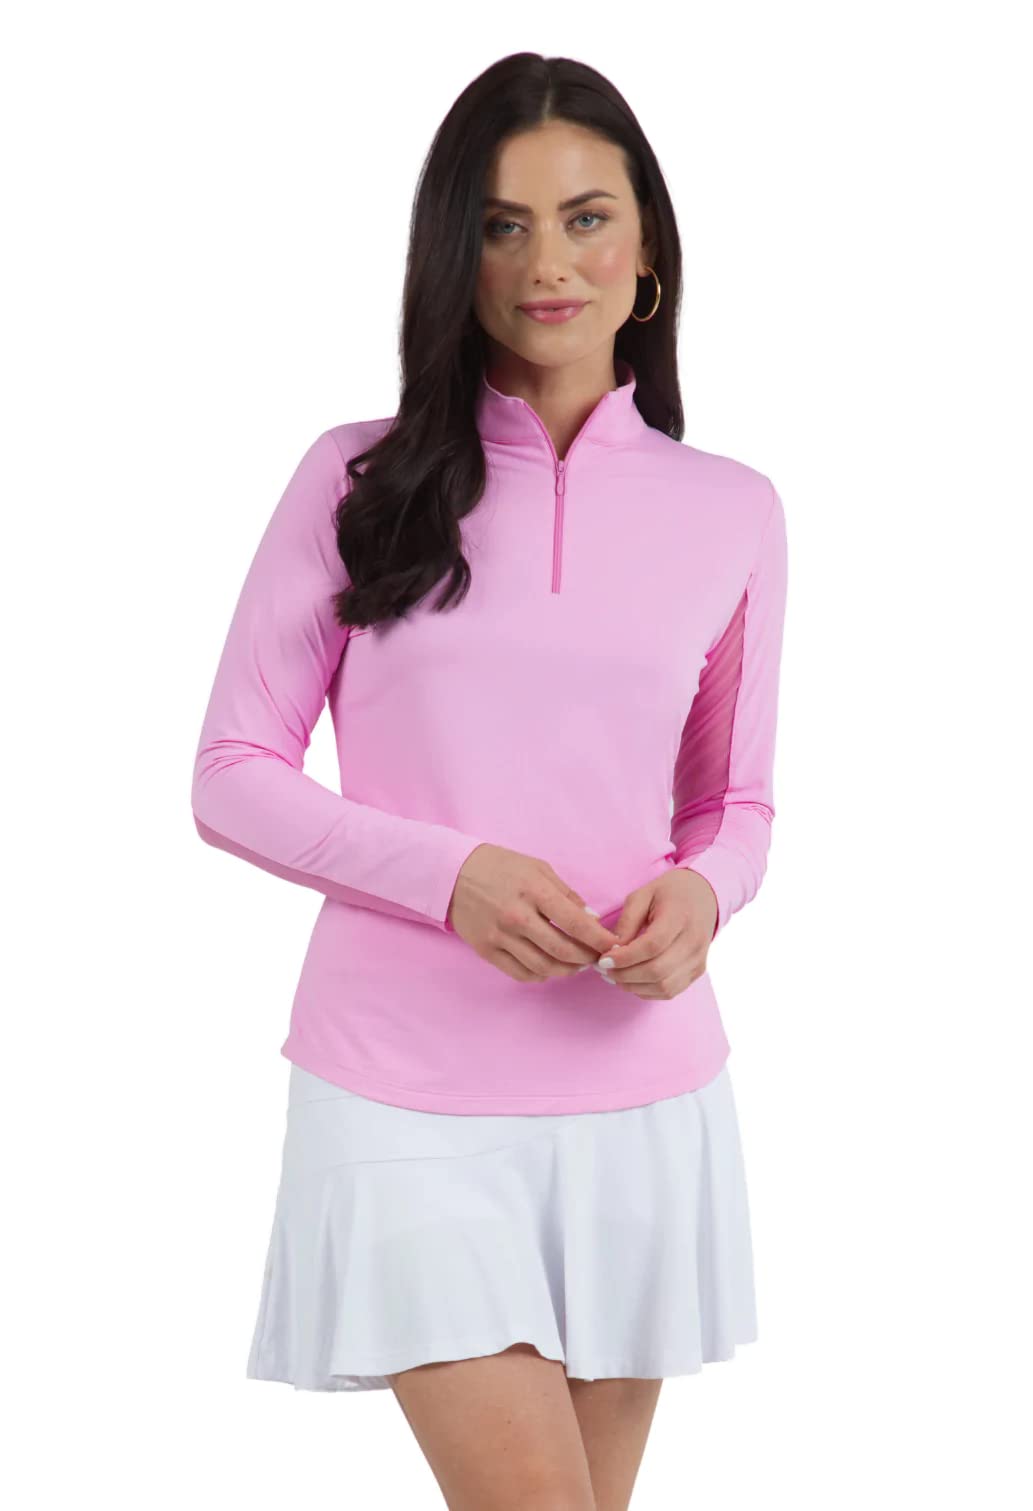 IBKUL Athleisure Wear Sun Protective UPF 50+ Icefil Cooling Tech Long Sleeve Mock Neck Top with Under Arm Mesh 80000 Watermelon Solid XL